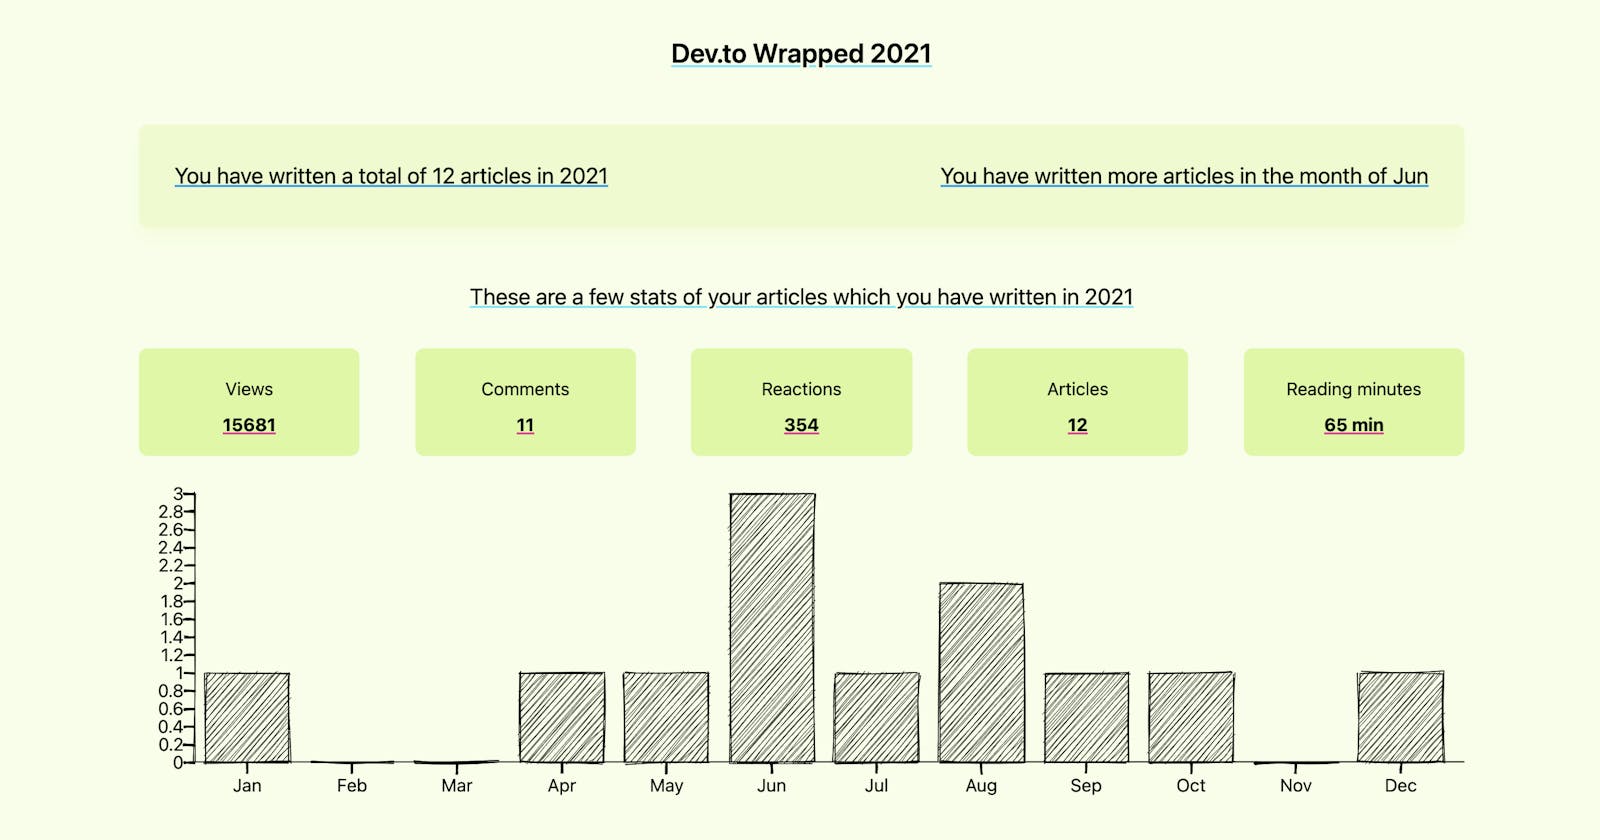 Generate your own Dev.to wrapped 2021